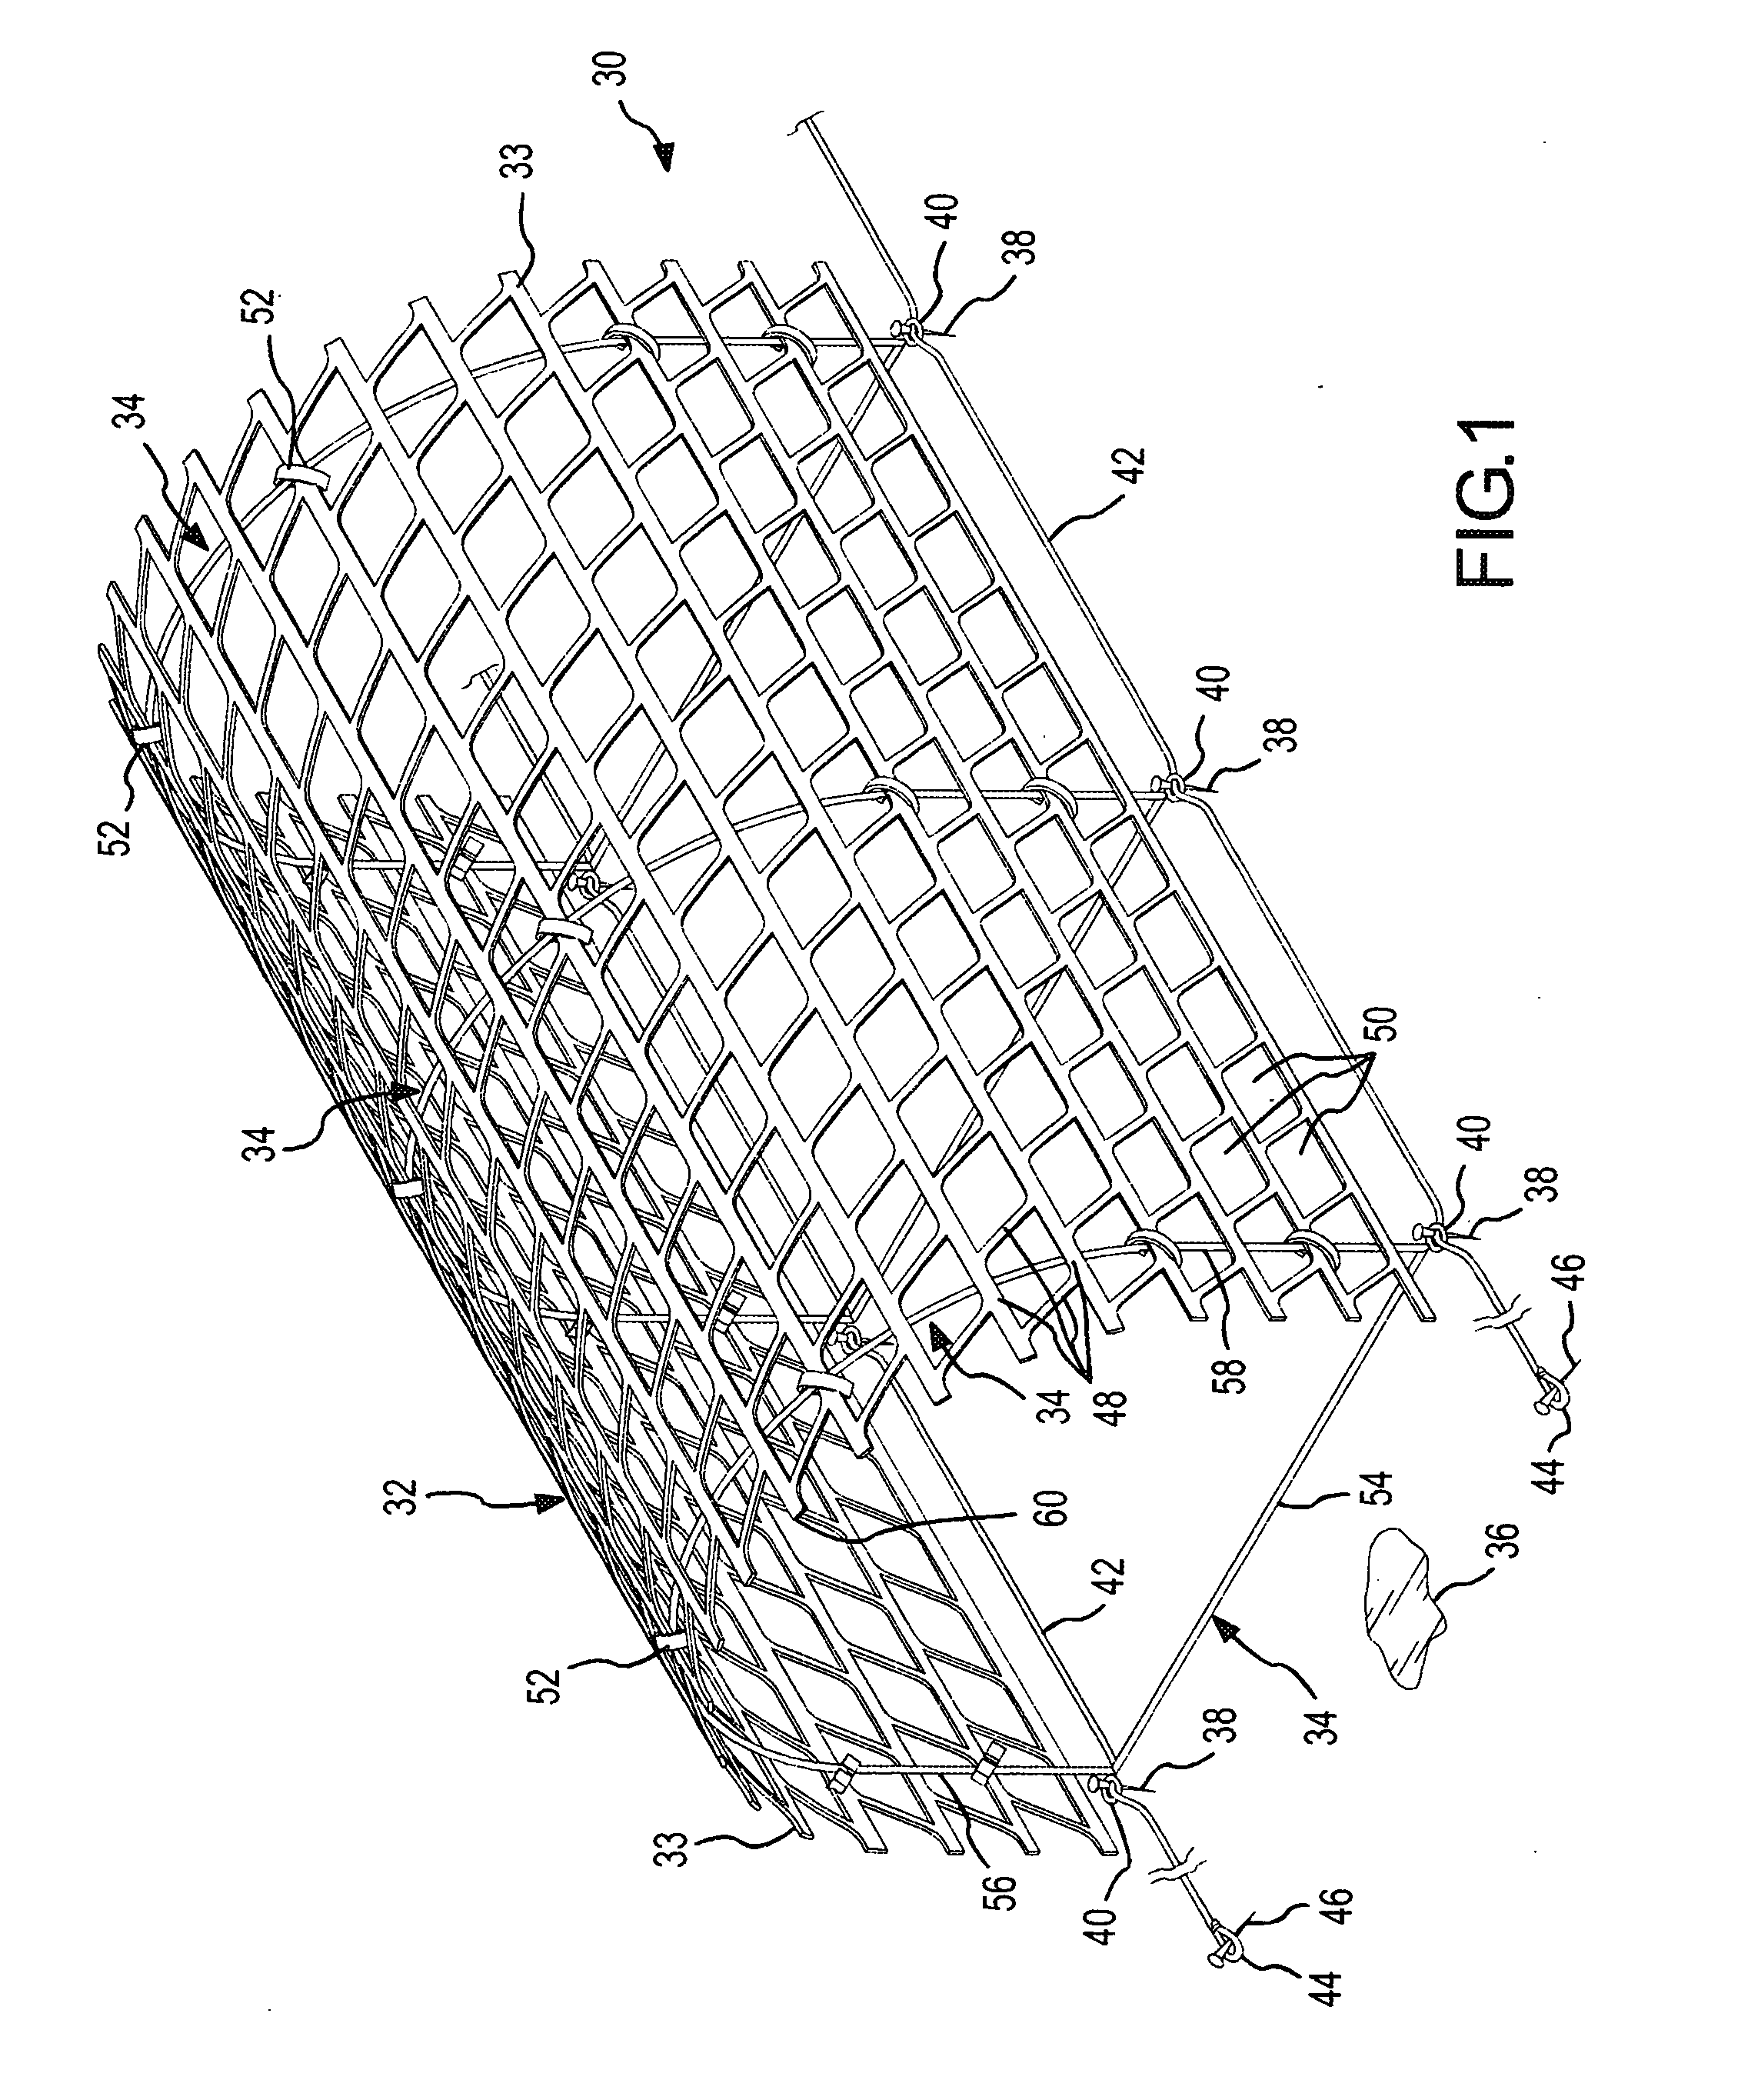 Apparatus and method for efficiently fabricating, dismantling and storing a porous tubular windblown particle control device